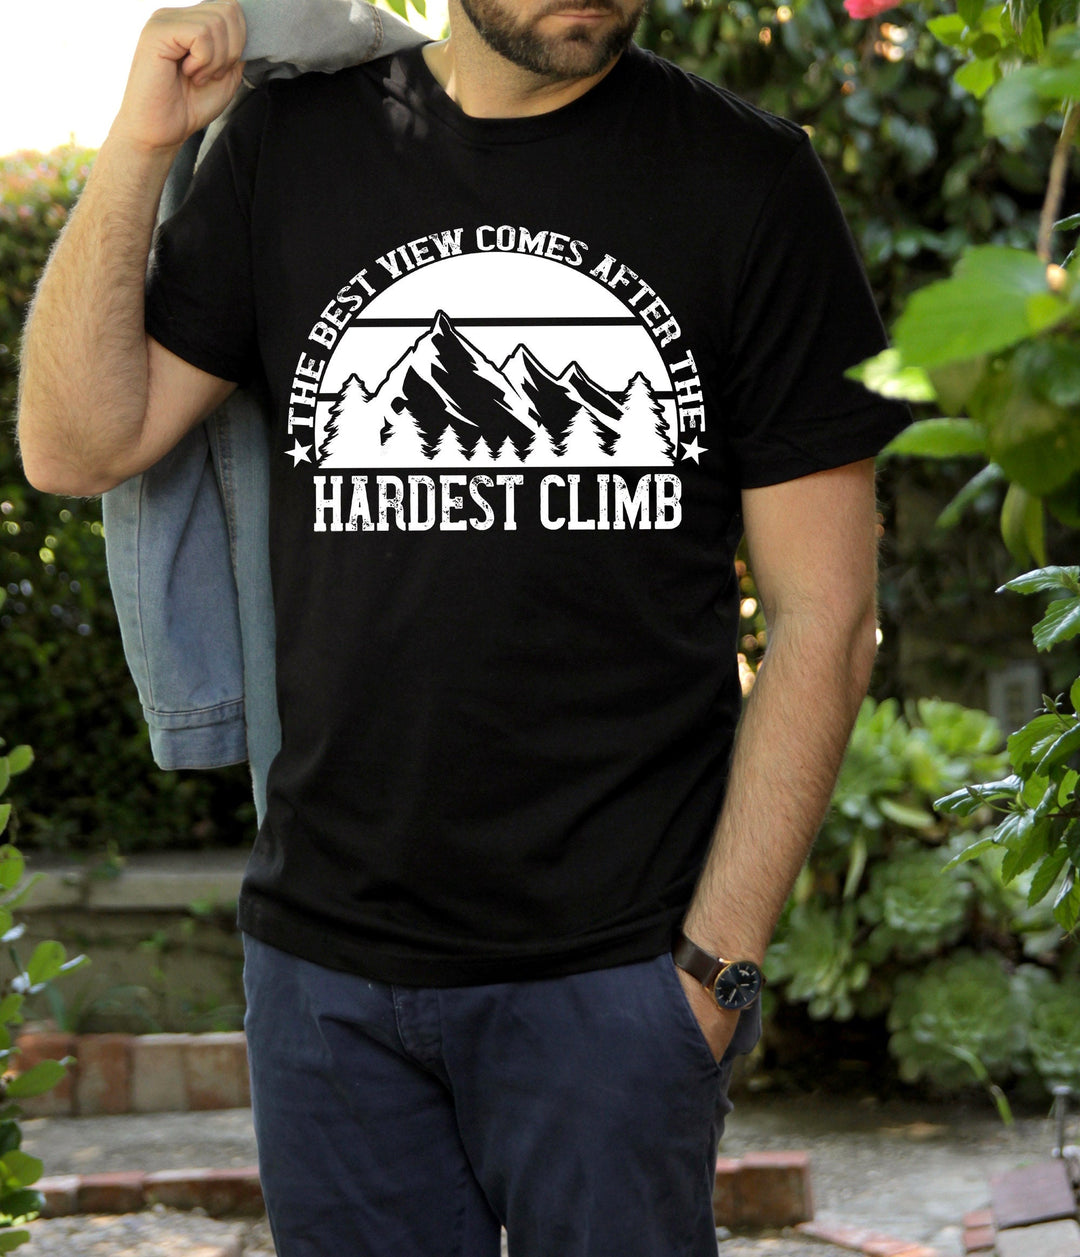 Best View Comes After the Hardest Climb Bella Canvas T-Shirt